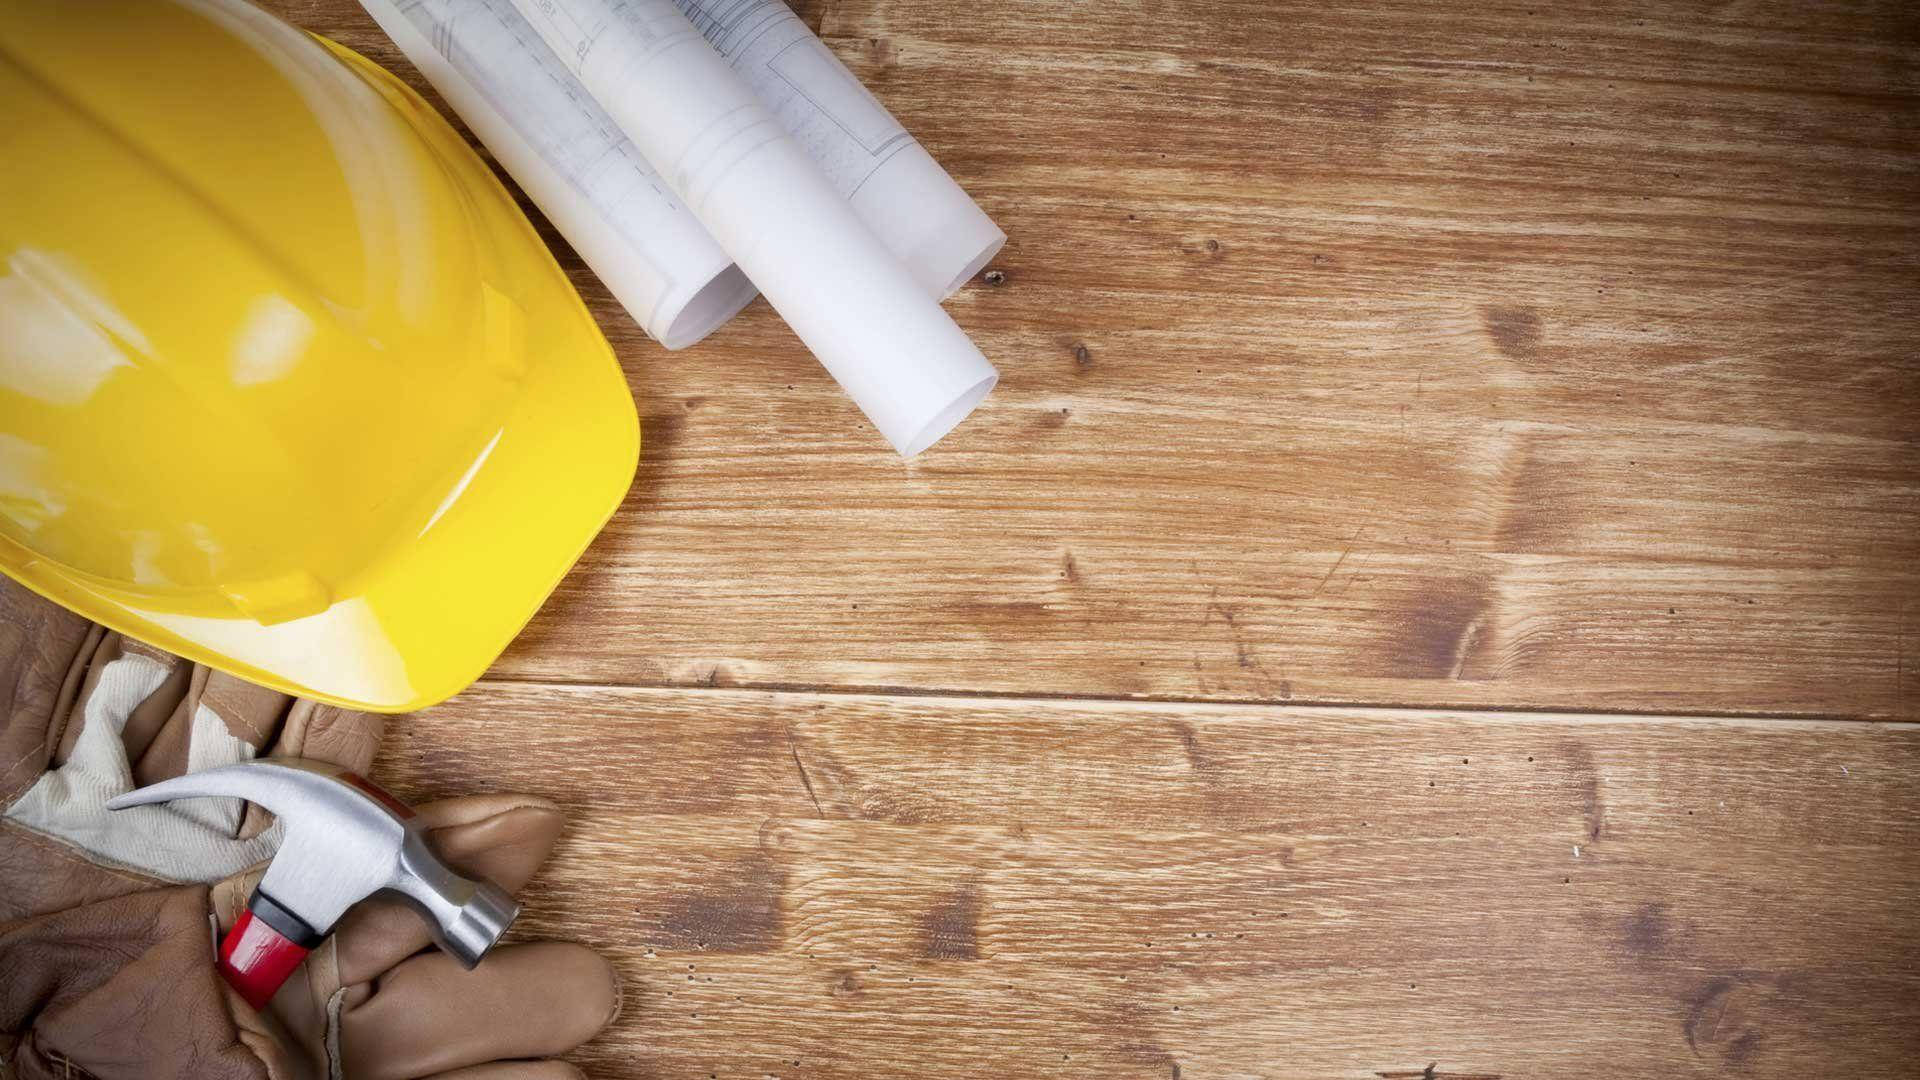 Construction Tools On A Wooden Surface Background